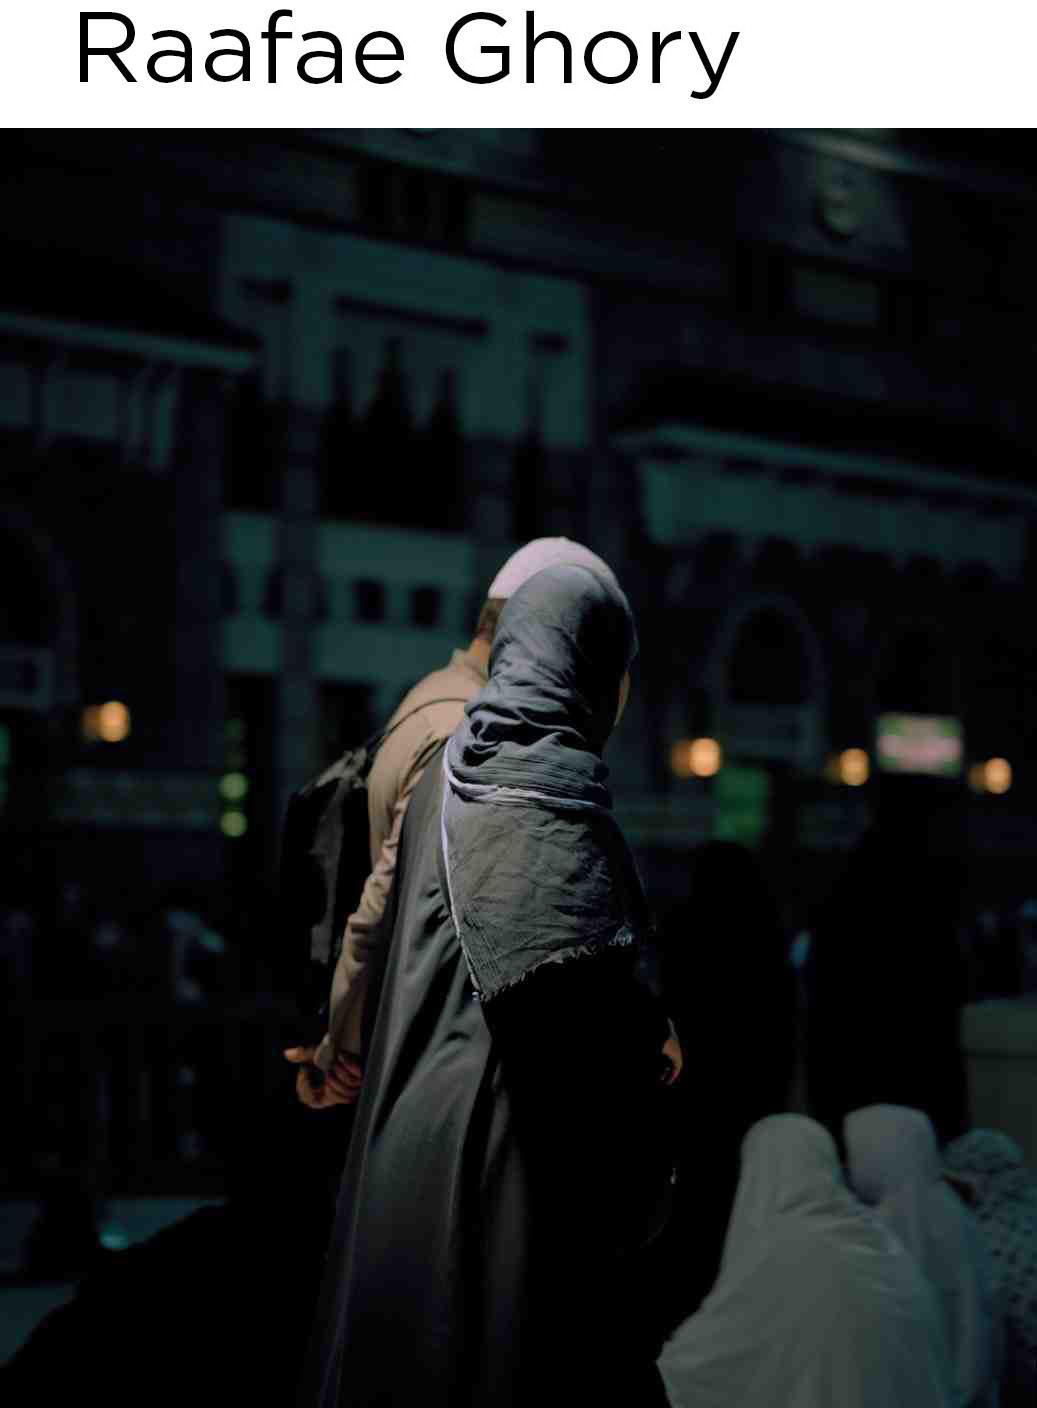 person in religious garb at night